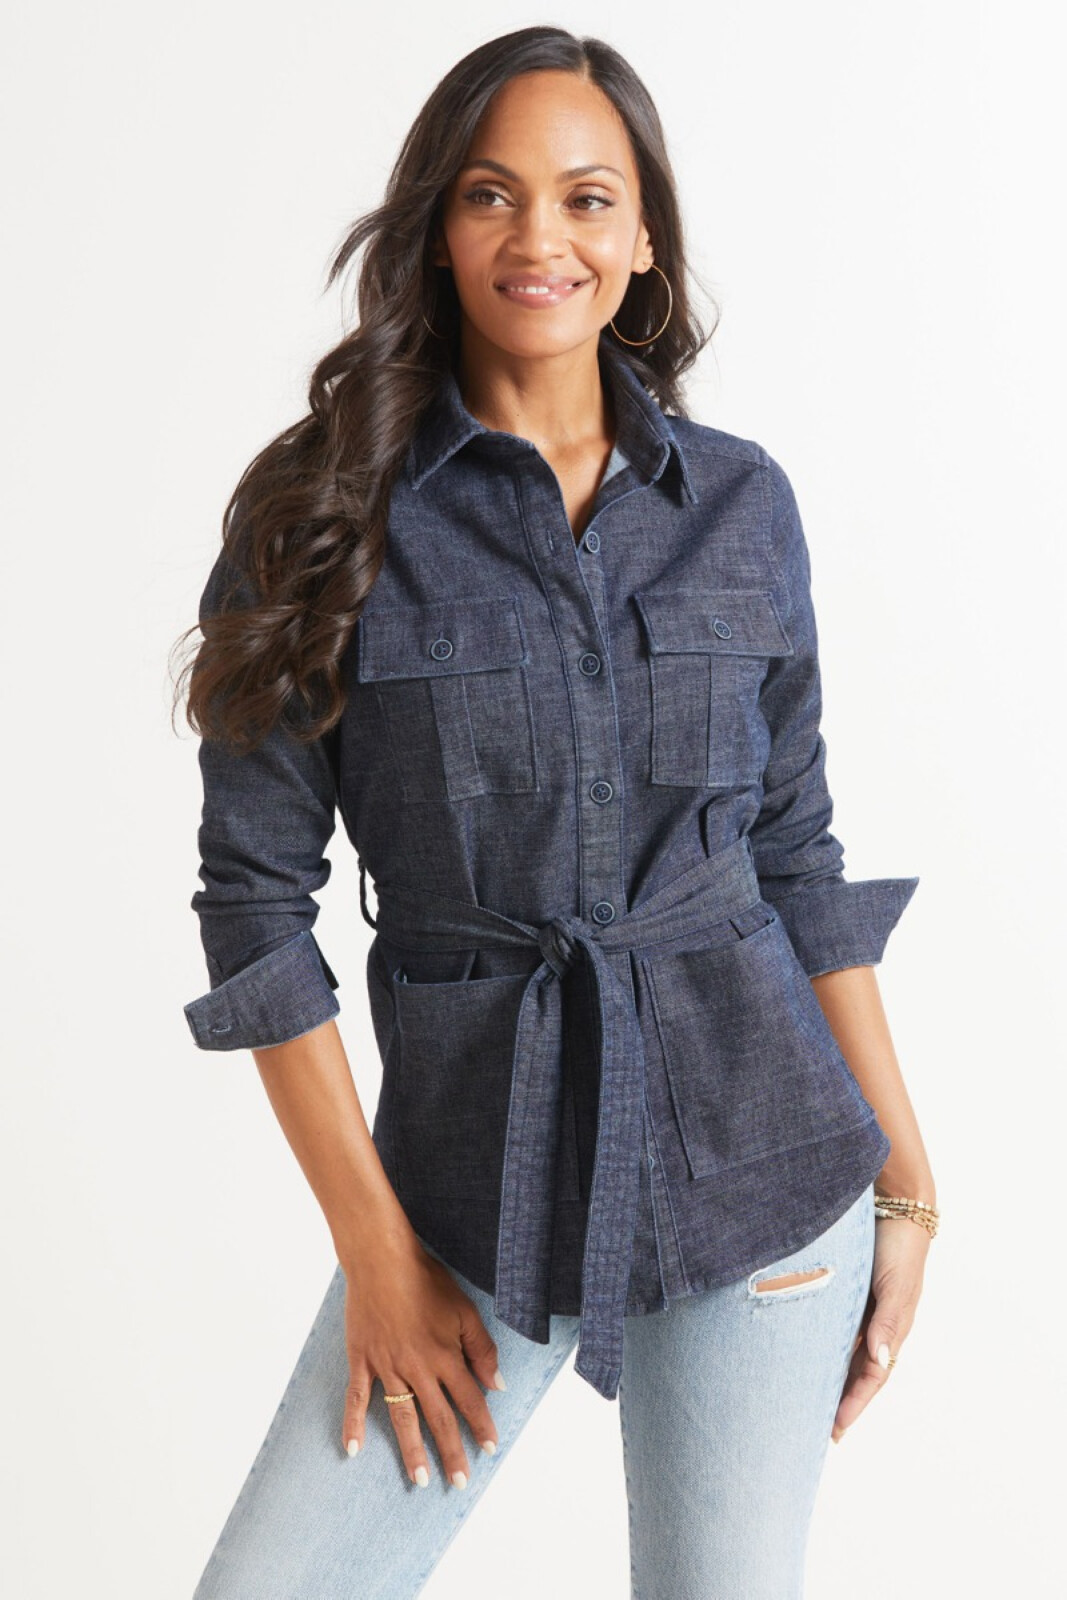 Bare Denim Women Button Down Sleeveless Blue Top - Selling Fast at  Pantaloons.com